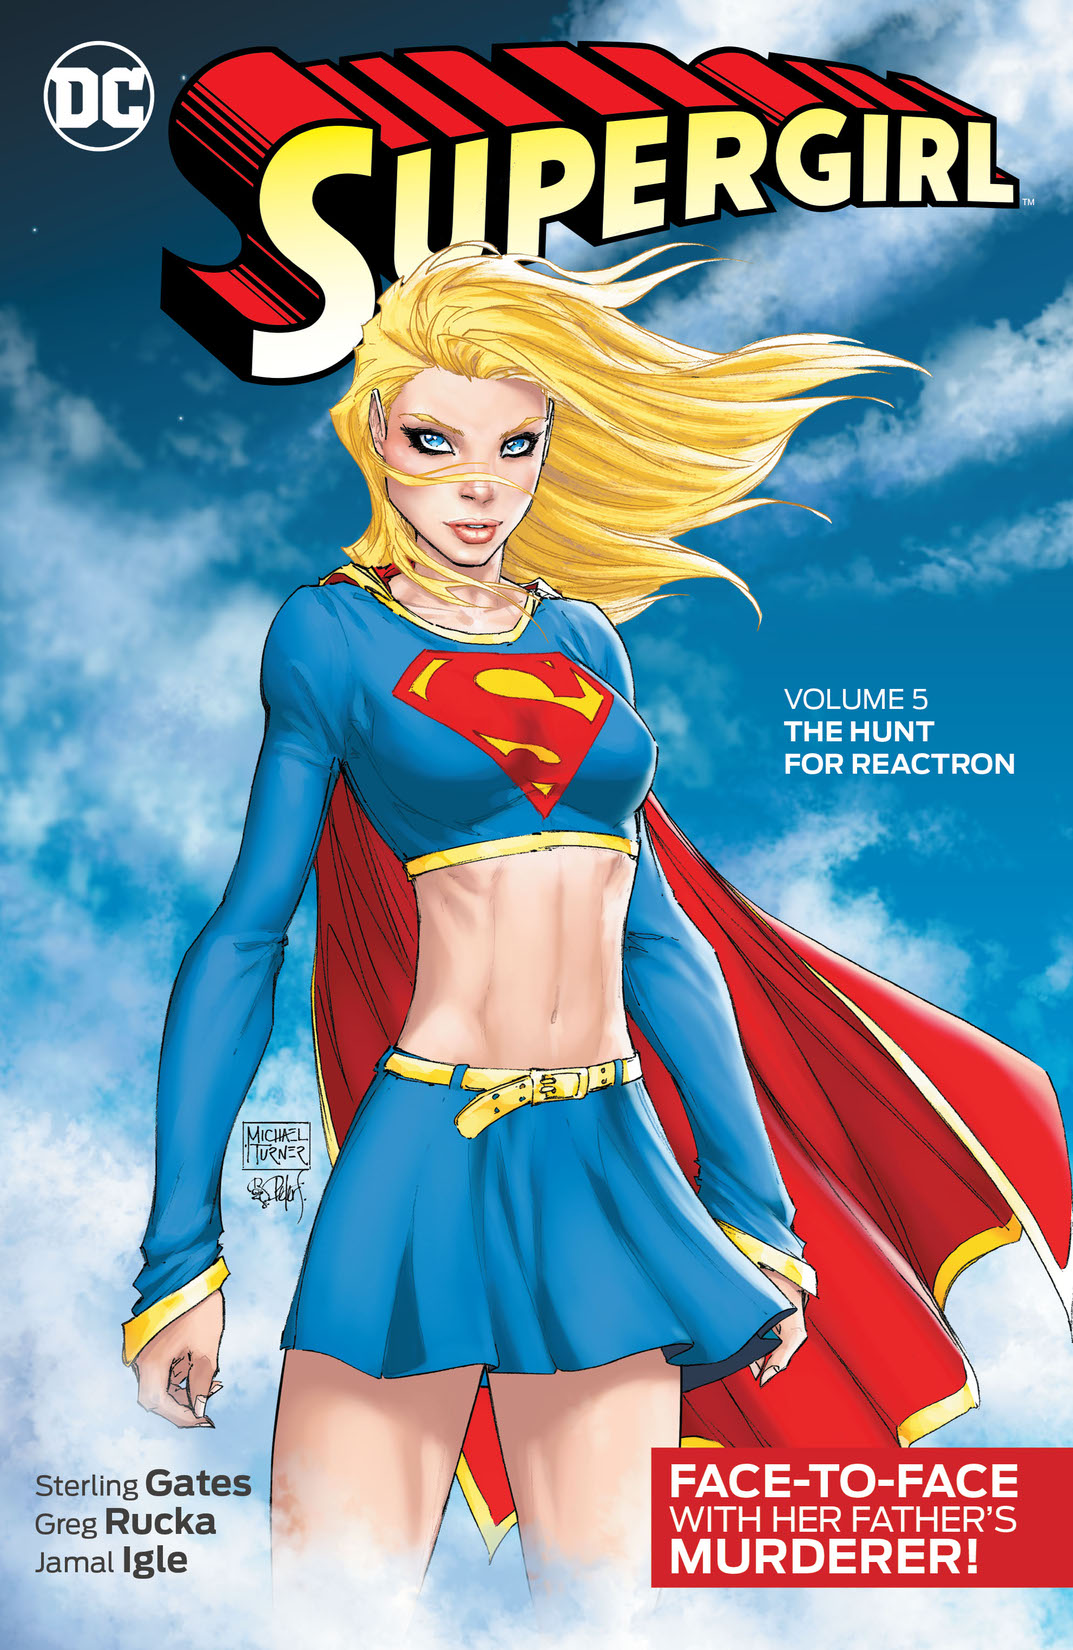 Supergirl Vol. 5: The Hunt for Reactron preview images